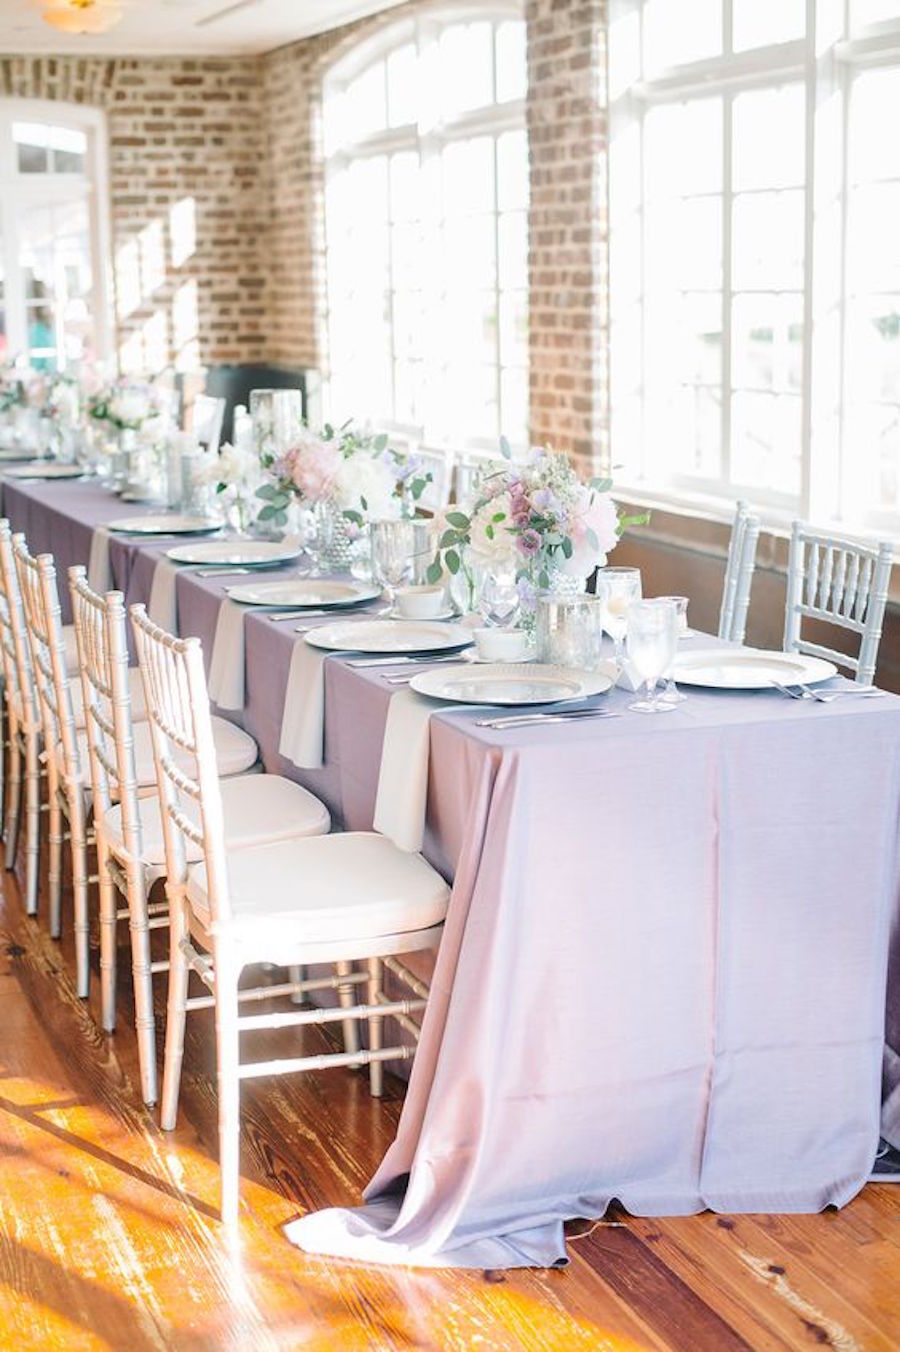 Lilac, Light Purple Wedding Table Linens with Ivory Chiavari Chairs | Tampa Bay Wedding Rental Linens by Connie Duglin Specialty Linens